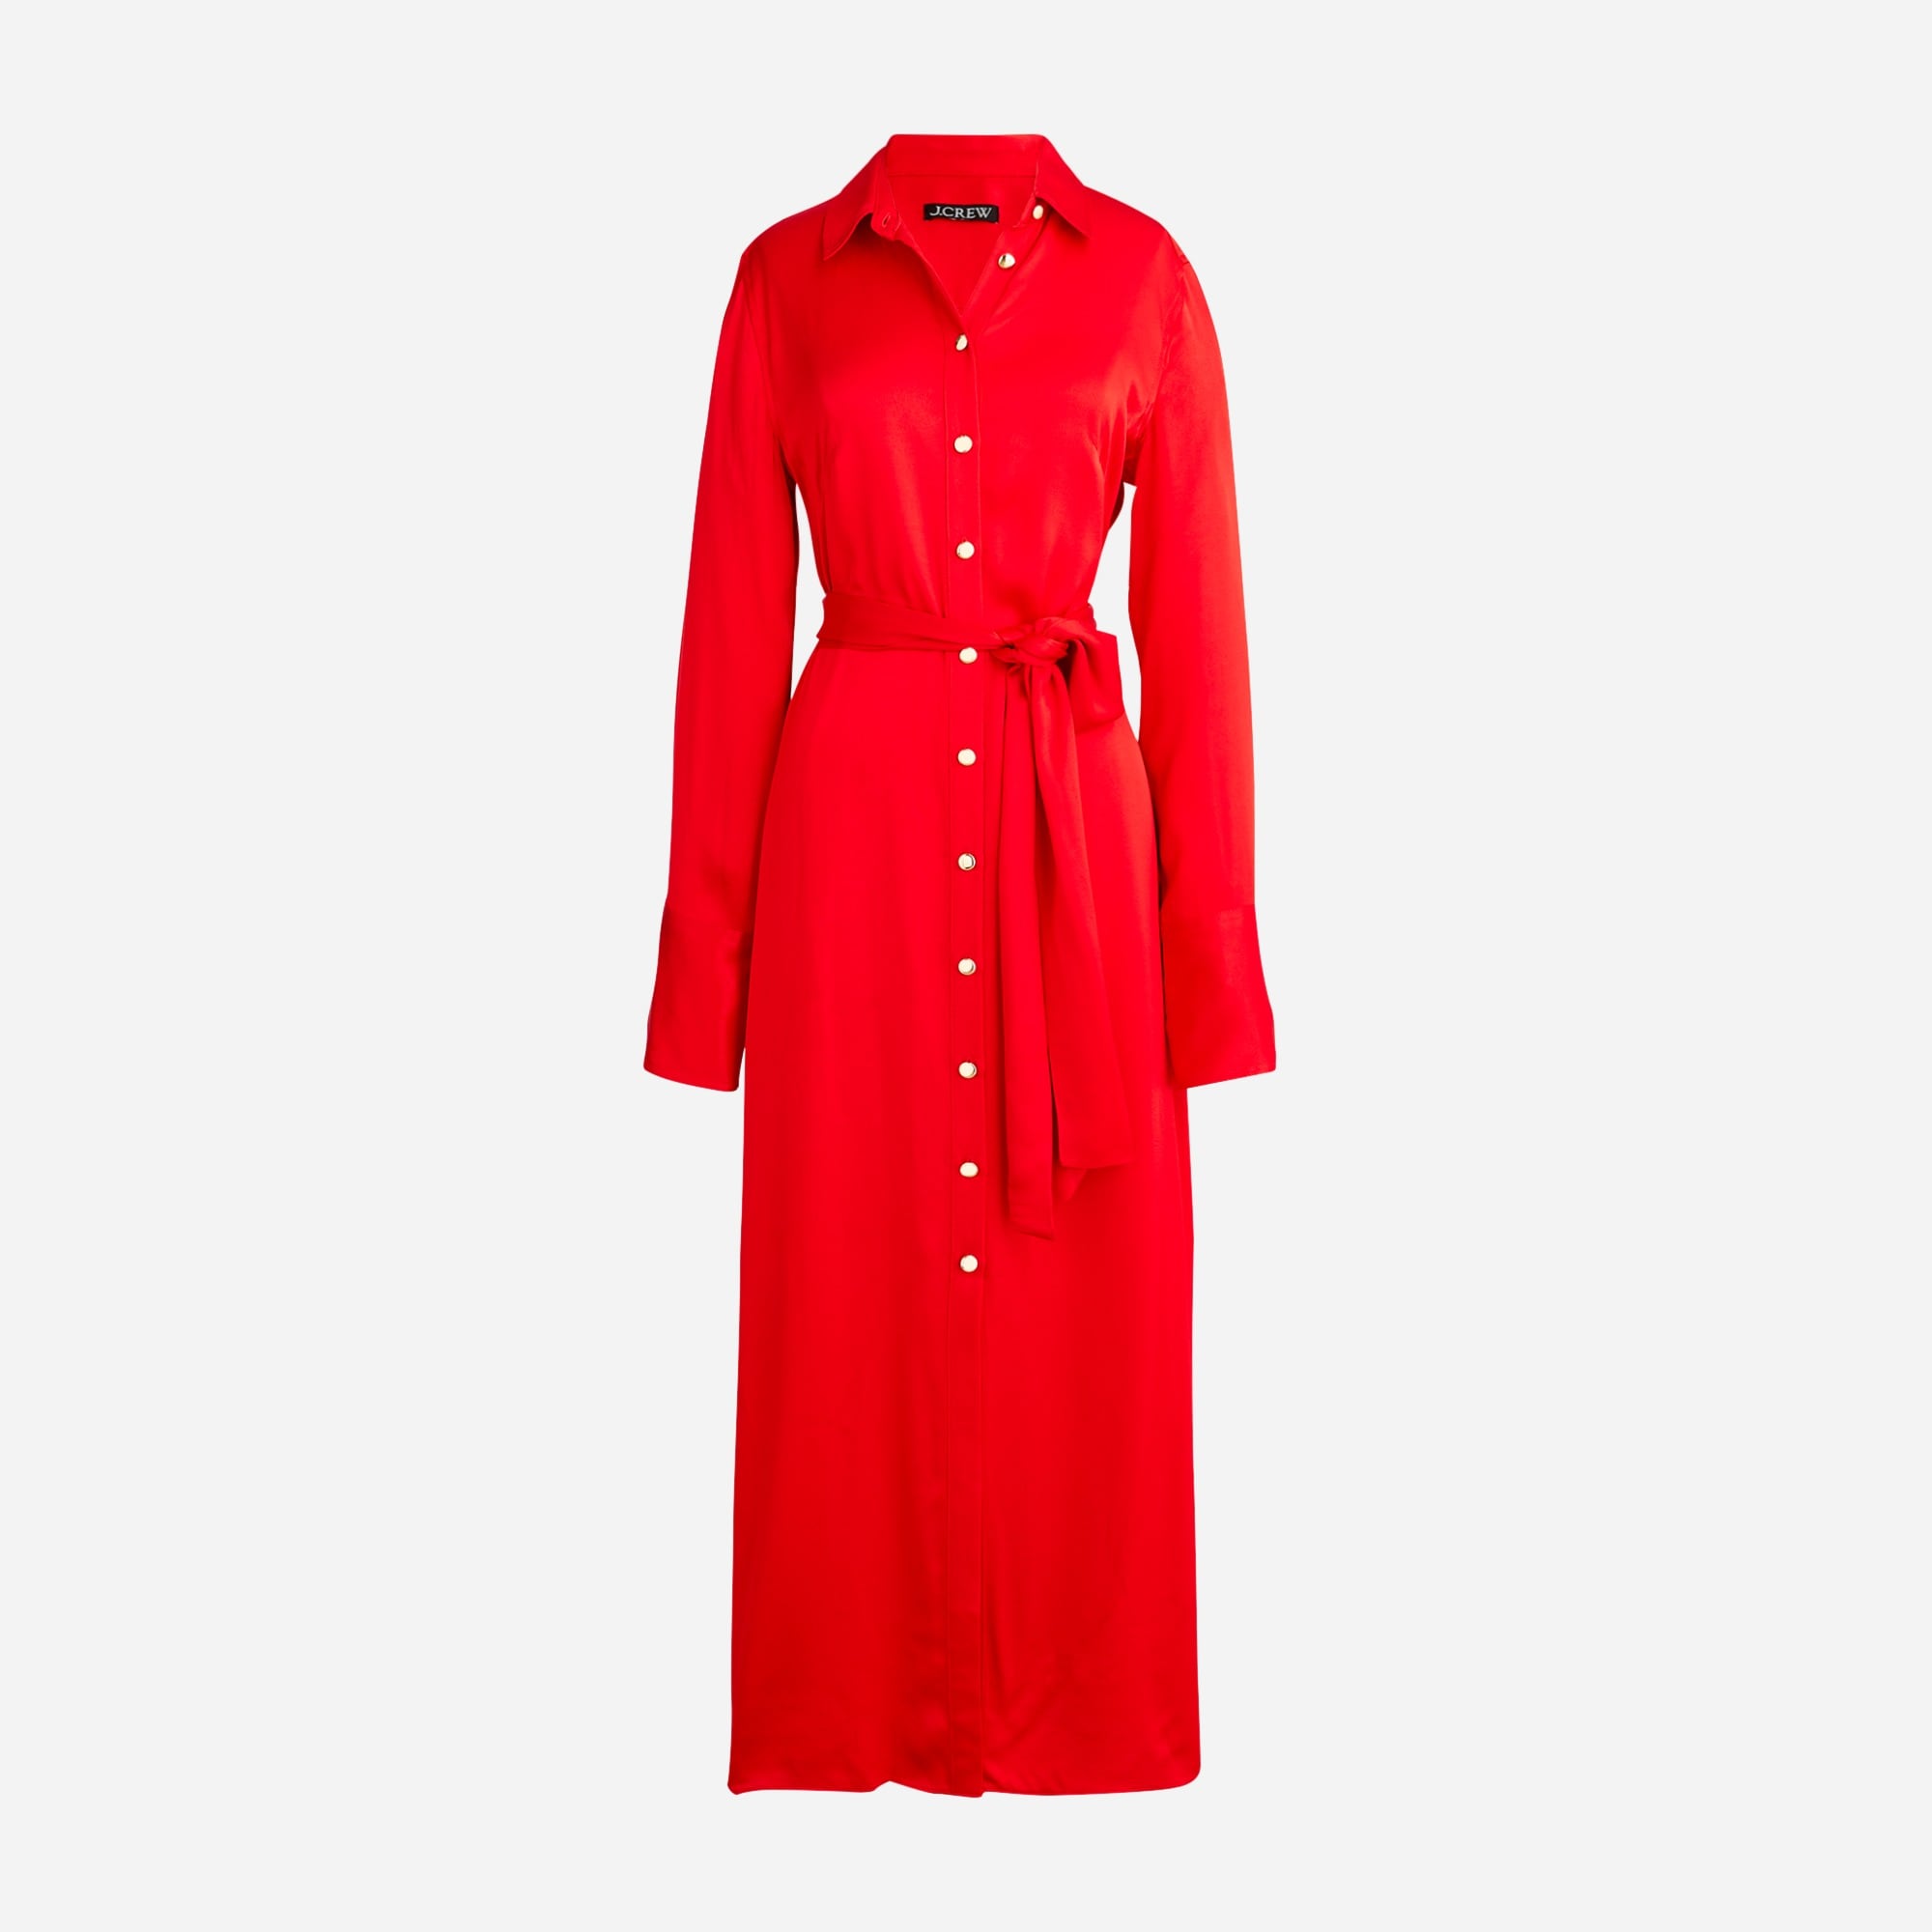  Drapey shirtdress in luster crepe